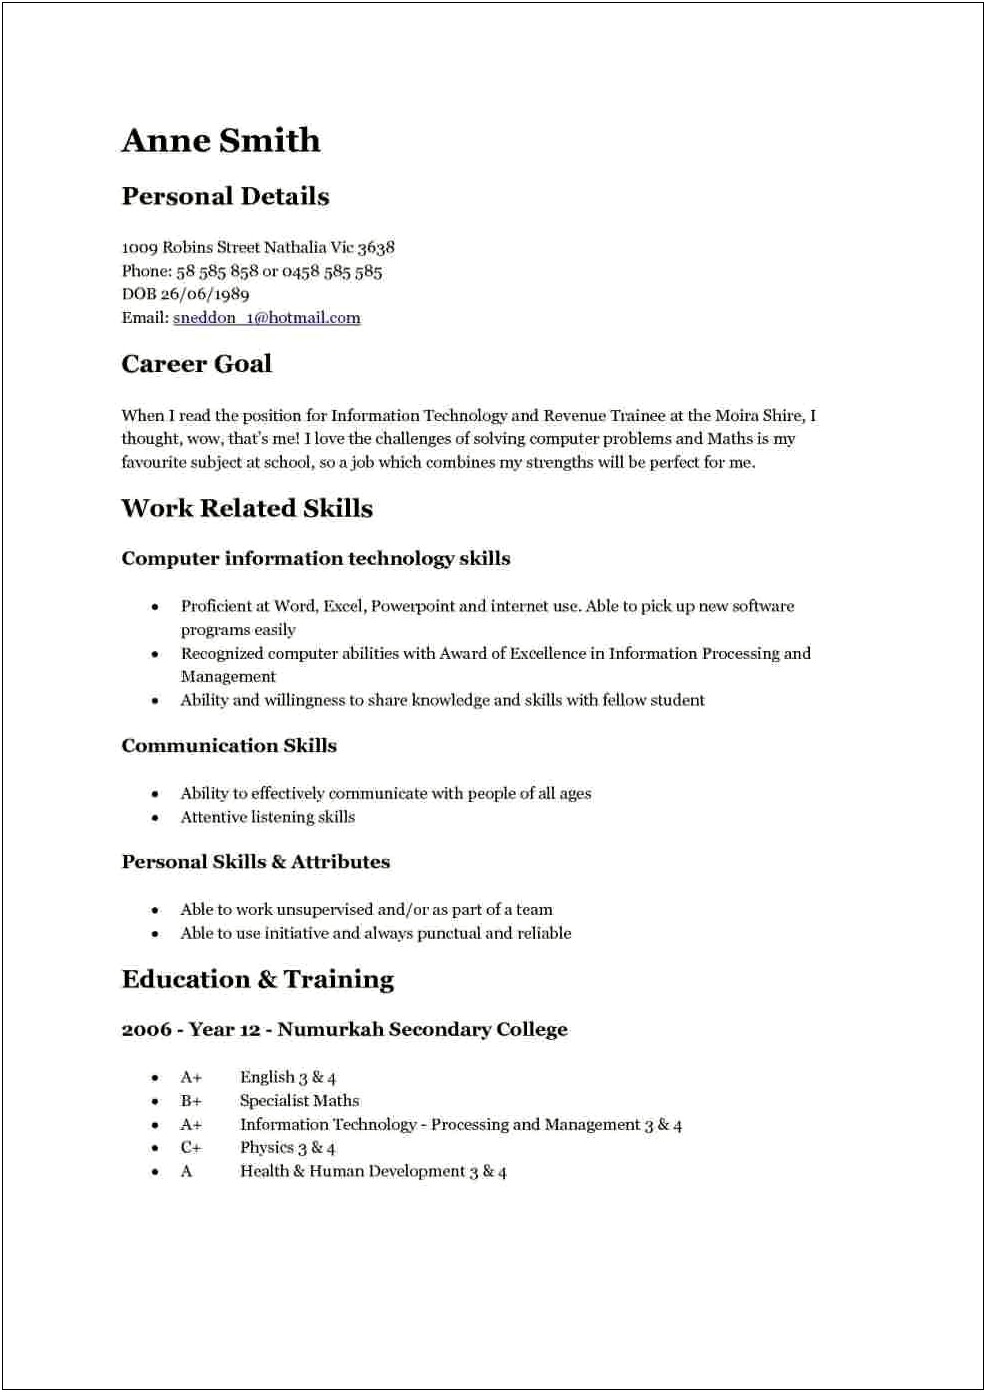 Resume Example For A 15 Year Old